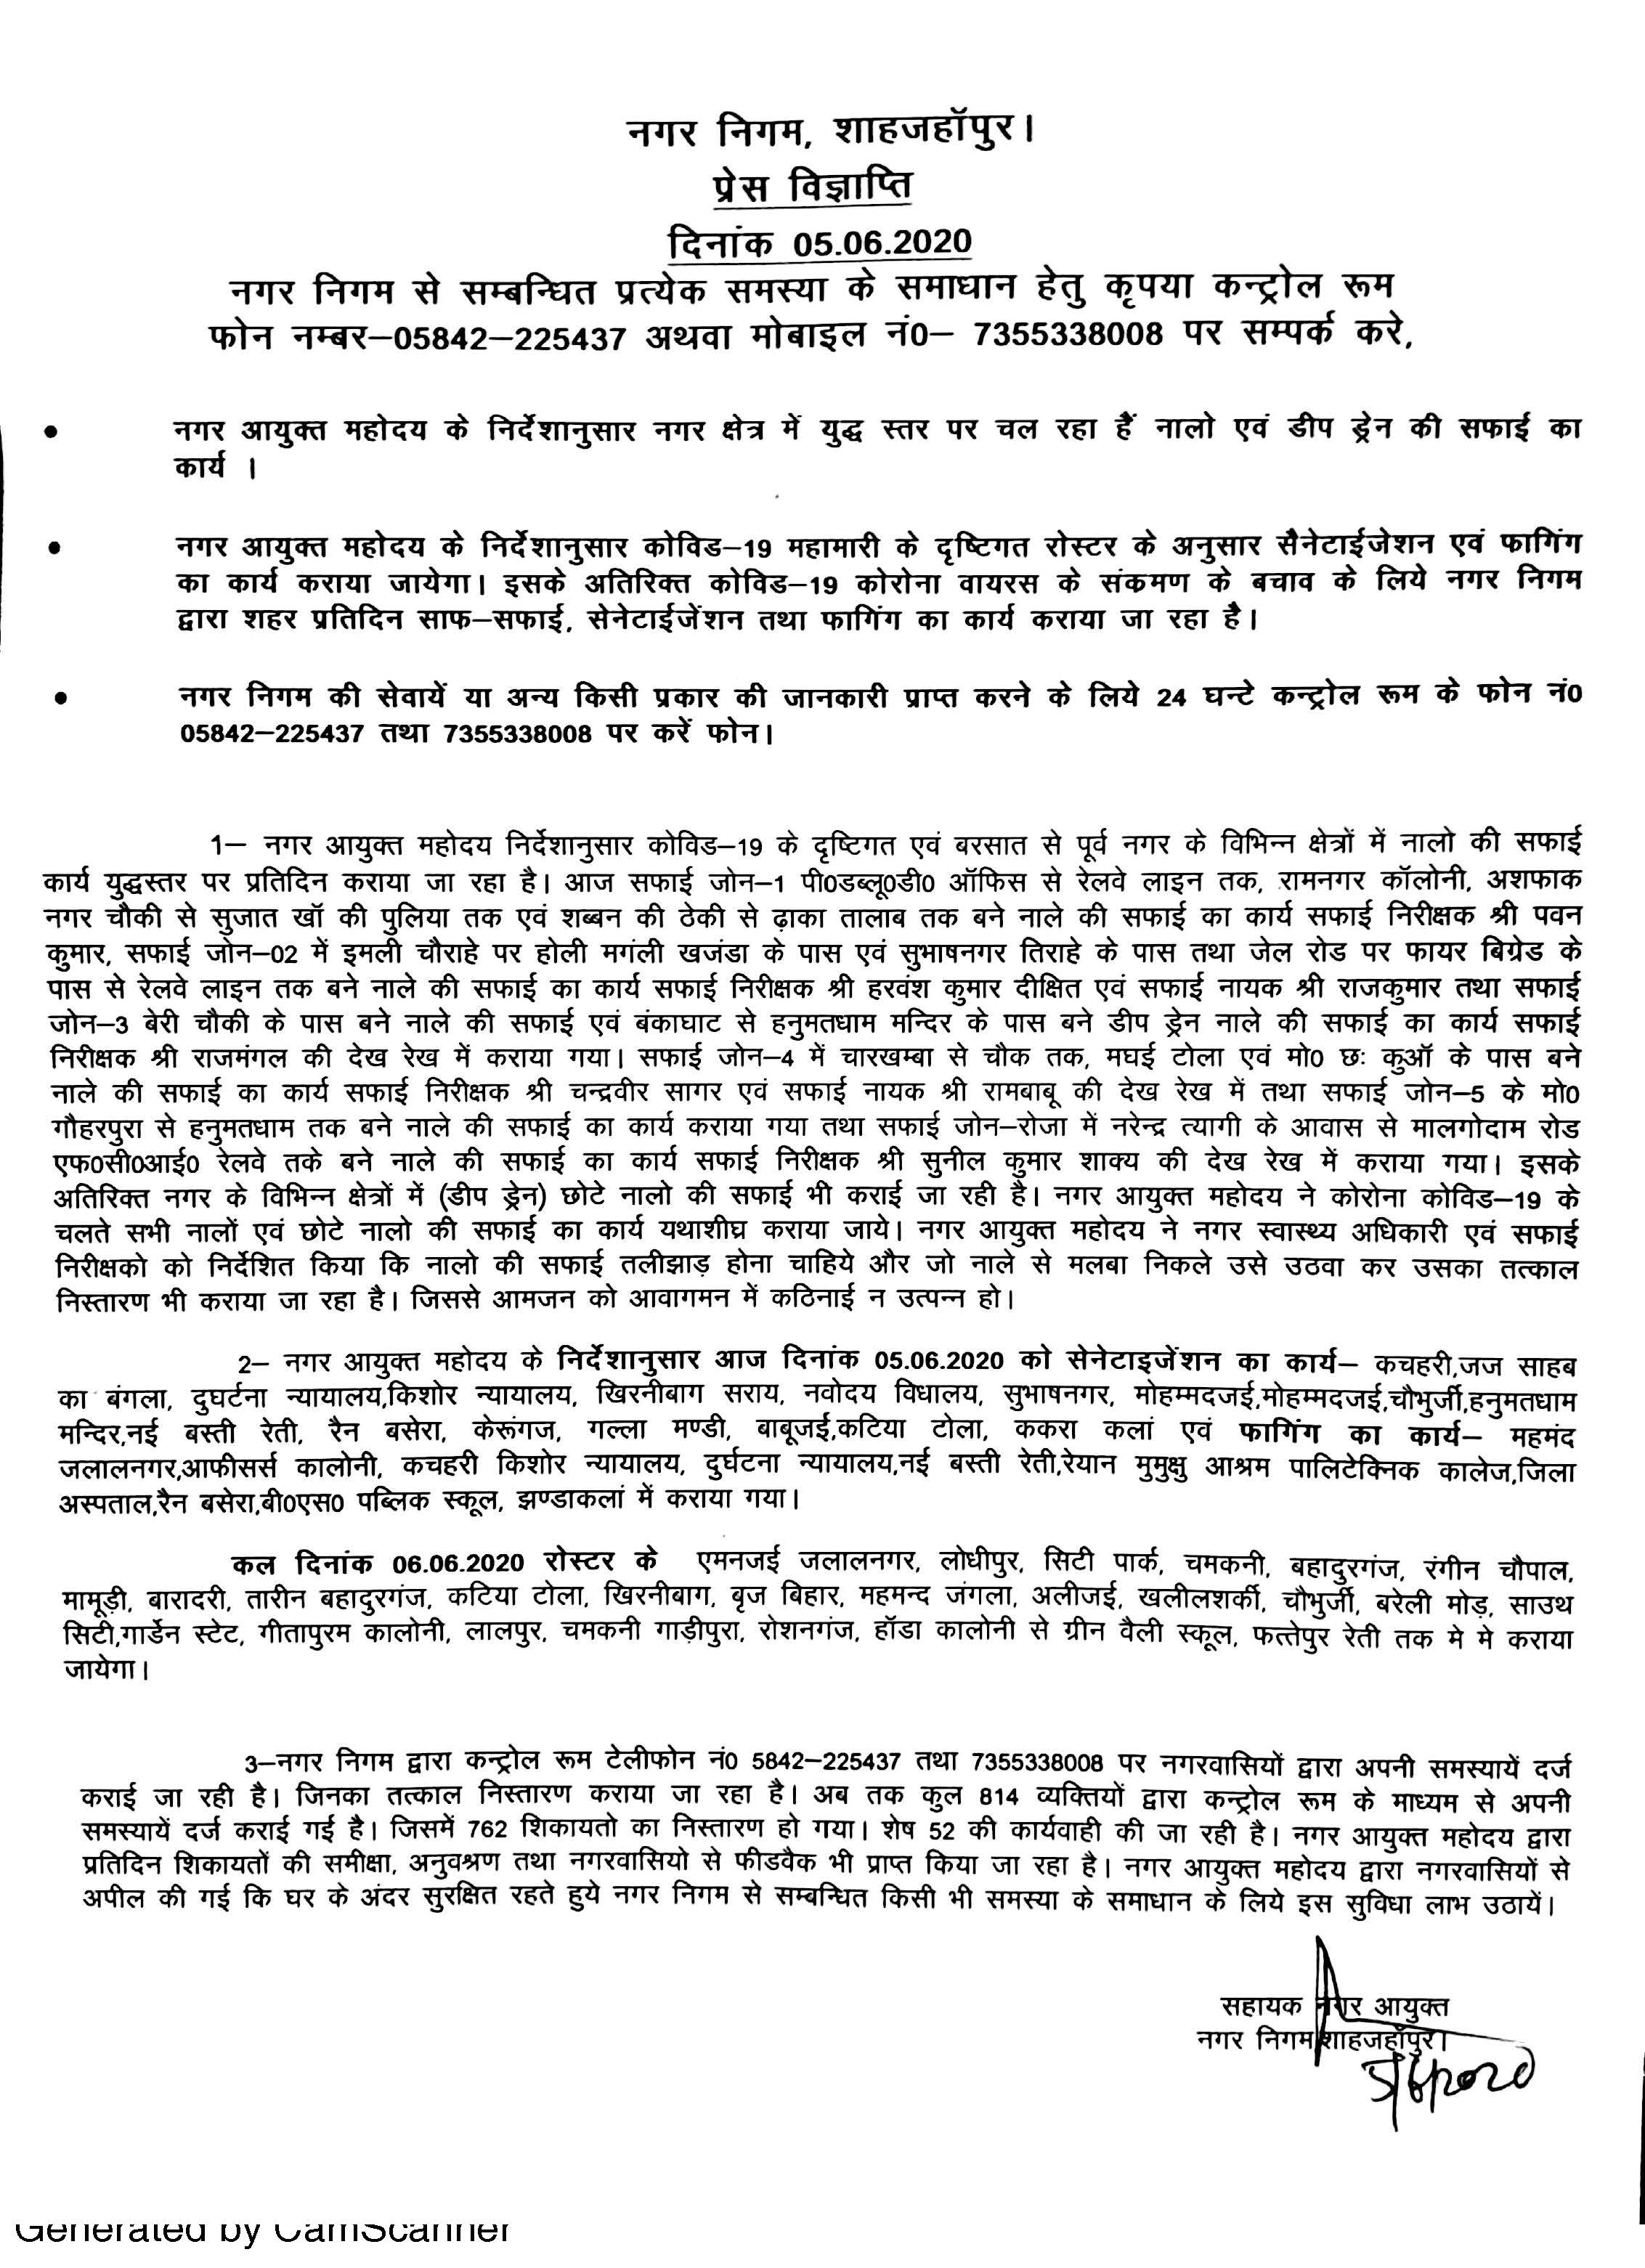 Regarding cleaning of drains on 05/06/2020, located in the city, on war level, in view of COVID-19